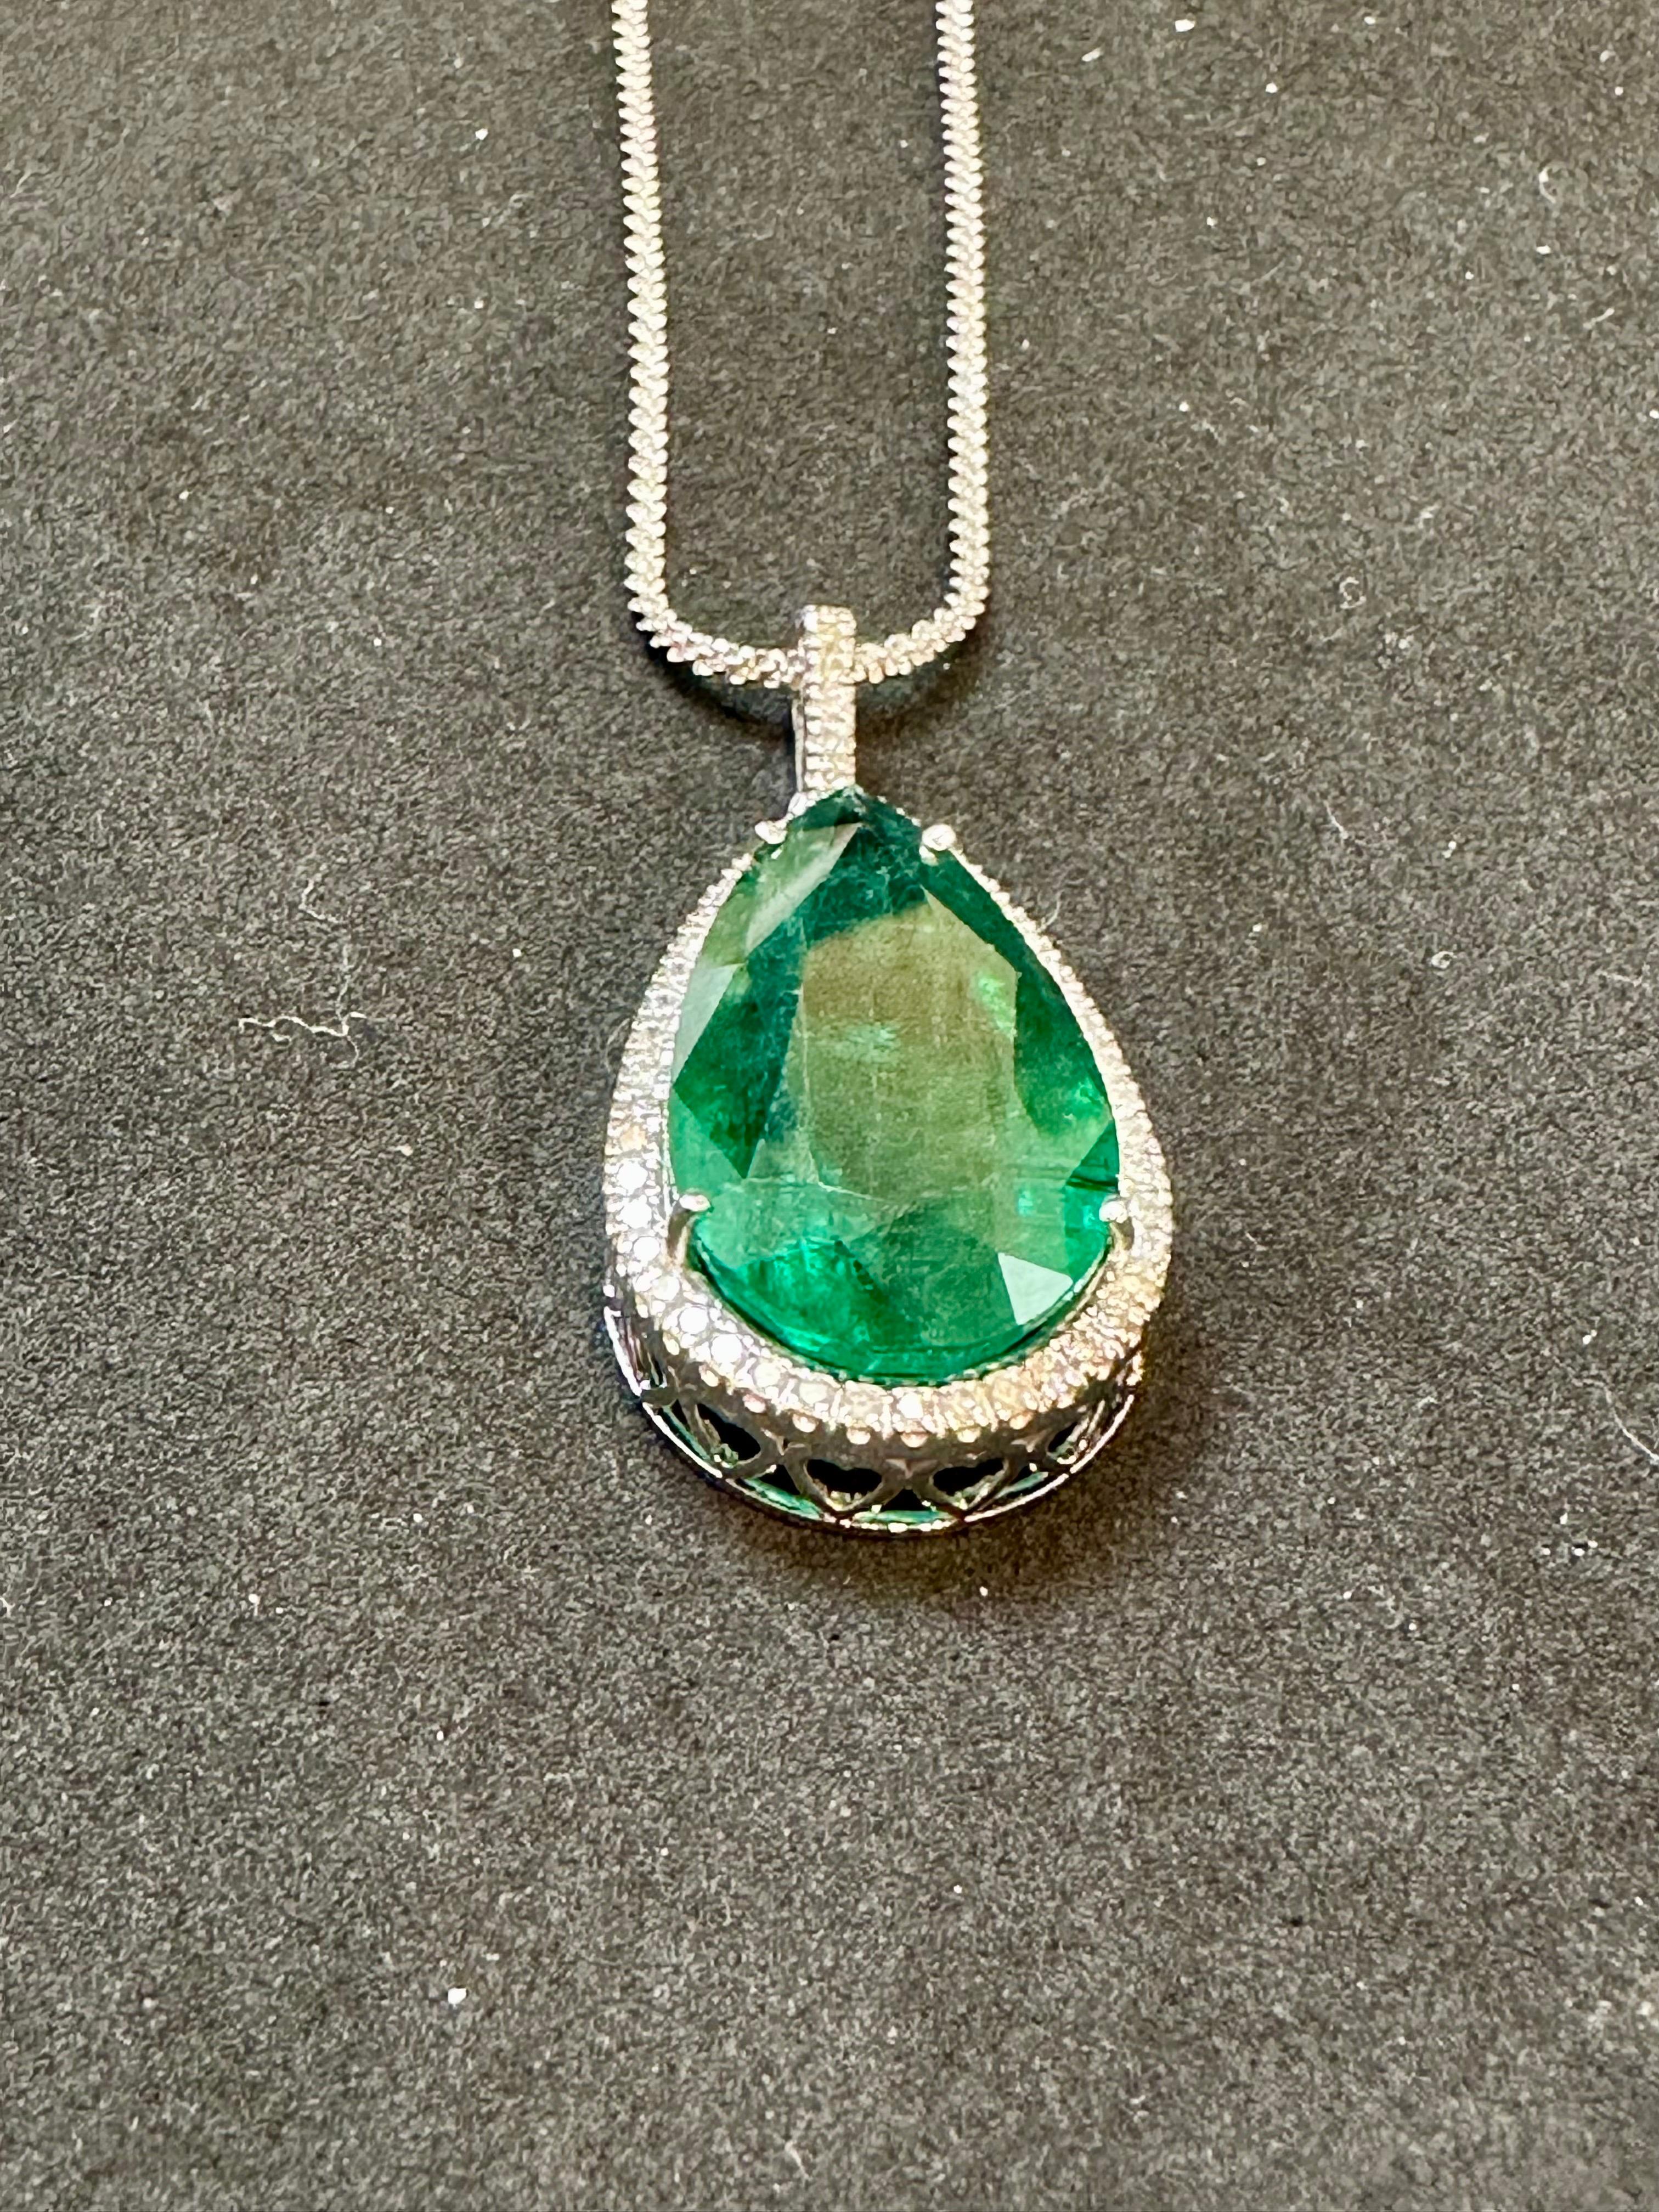 19 Ct Pear Cut Emerald & 1 Ct Diamond Halo Pendent/Necklace 14 KW Gold Chain For Sale 4